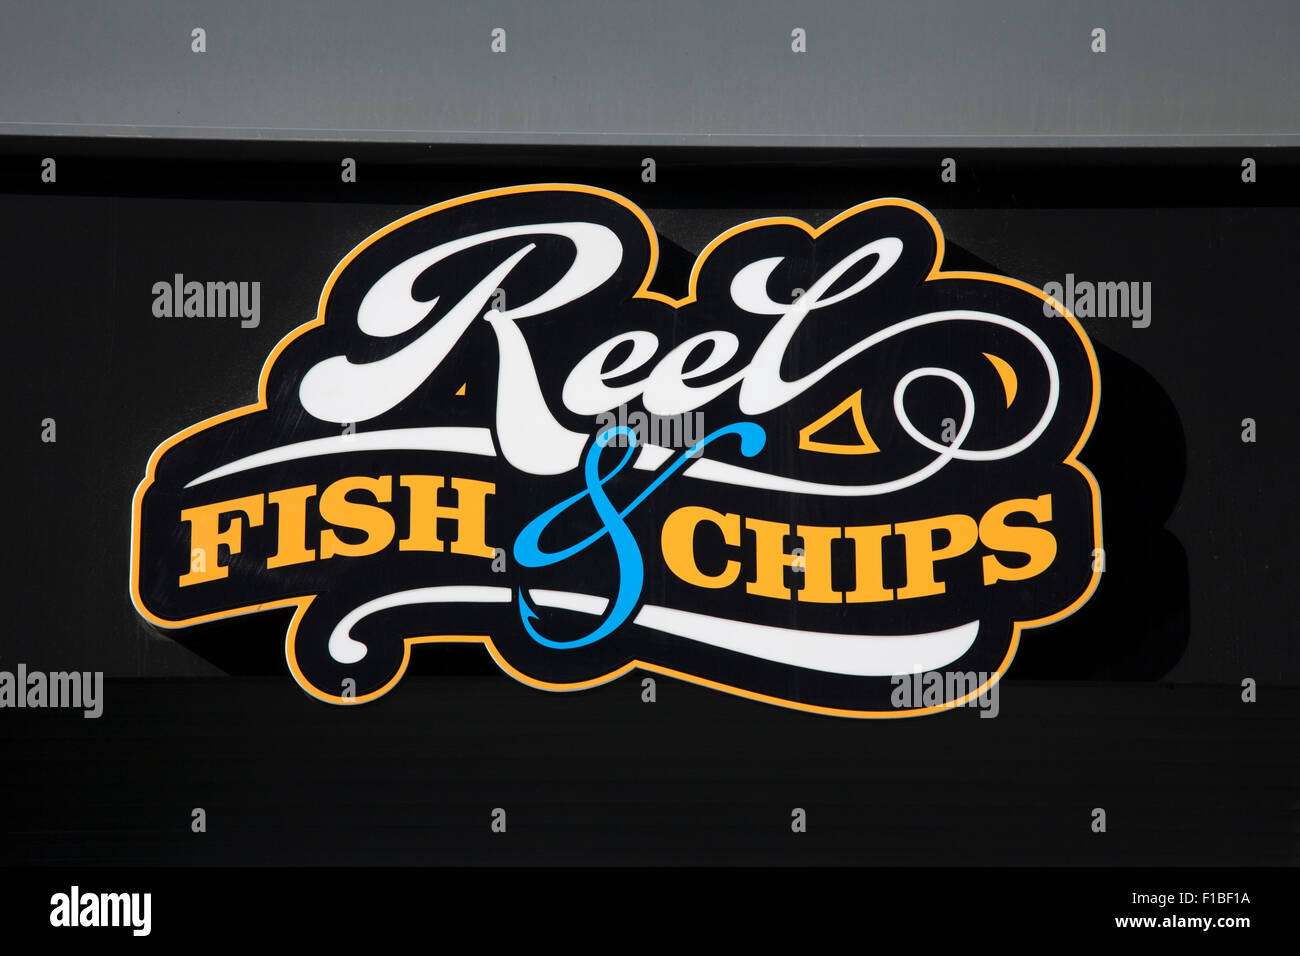 Reel Fish and Chips Sign, Liverpool, England, UK Stock Photo